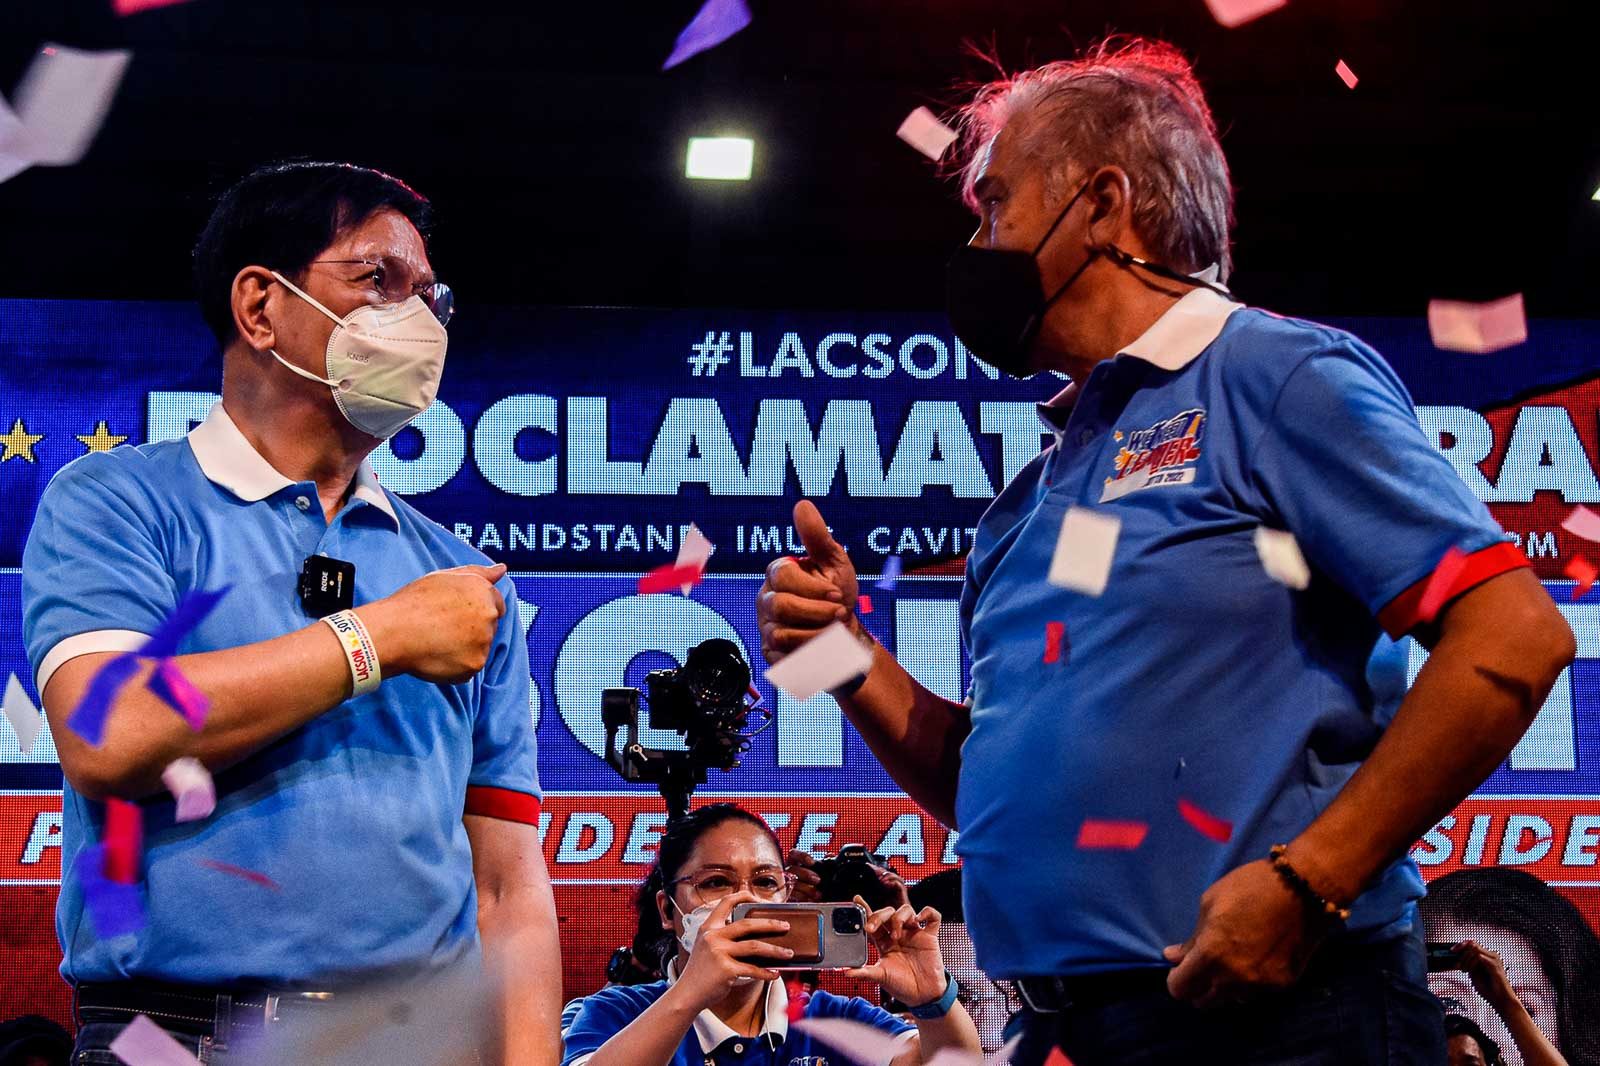 ‘Ang karapat-dapat’:  Lacson takes first step in uphill battle for presidency